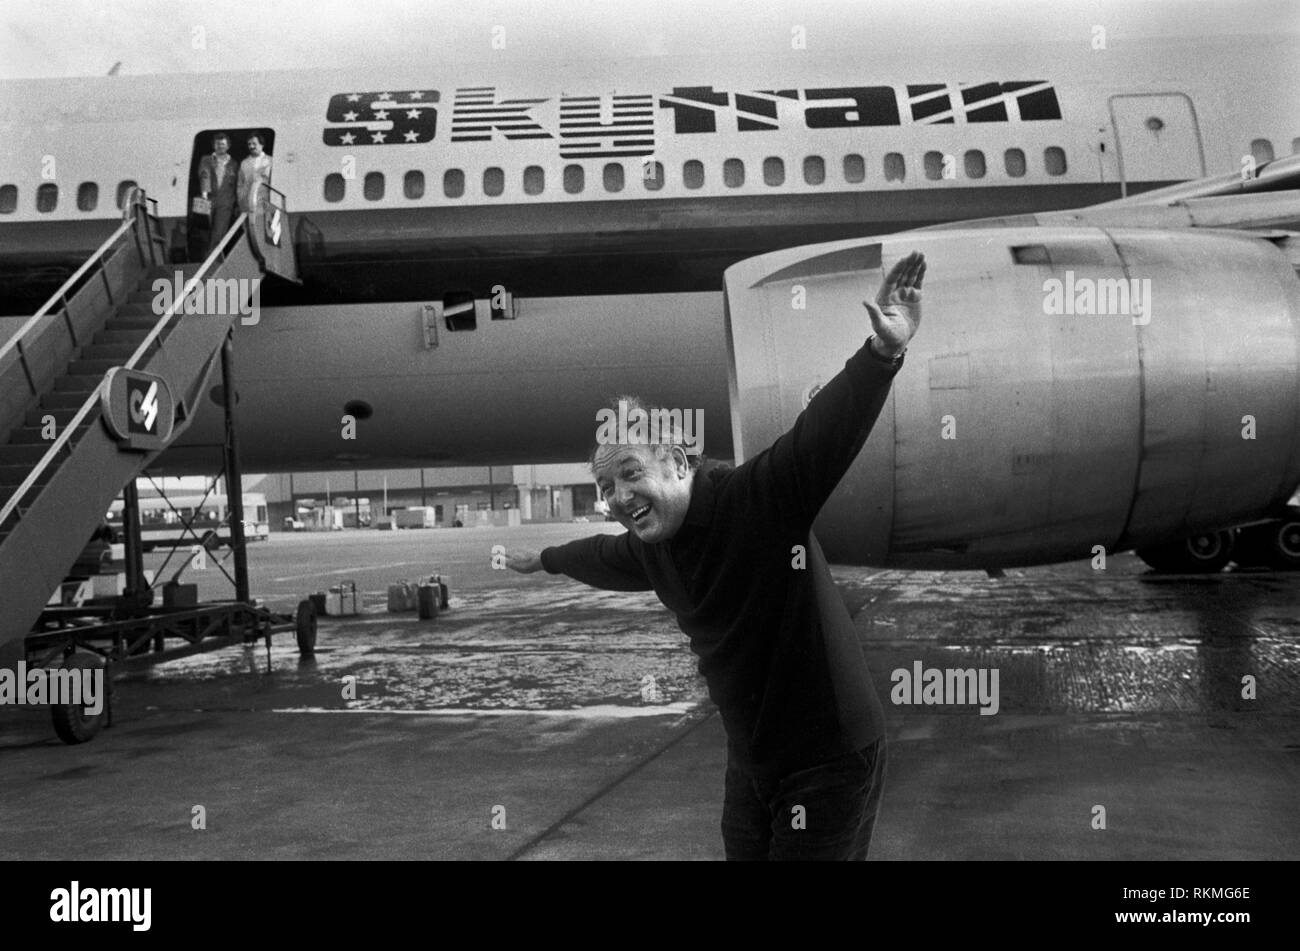 Sir Freddie Laker launched Skytrain, the inaugural flight took place amongst much hype on 26th September 1977. This was a no frills low fare, budget daily service between London Gatwick and JFK in New York. Cost £59-00. 1970S UK.  HOMER SYKES. Stock Photo